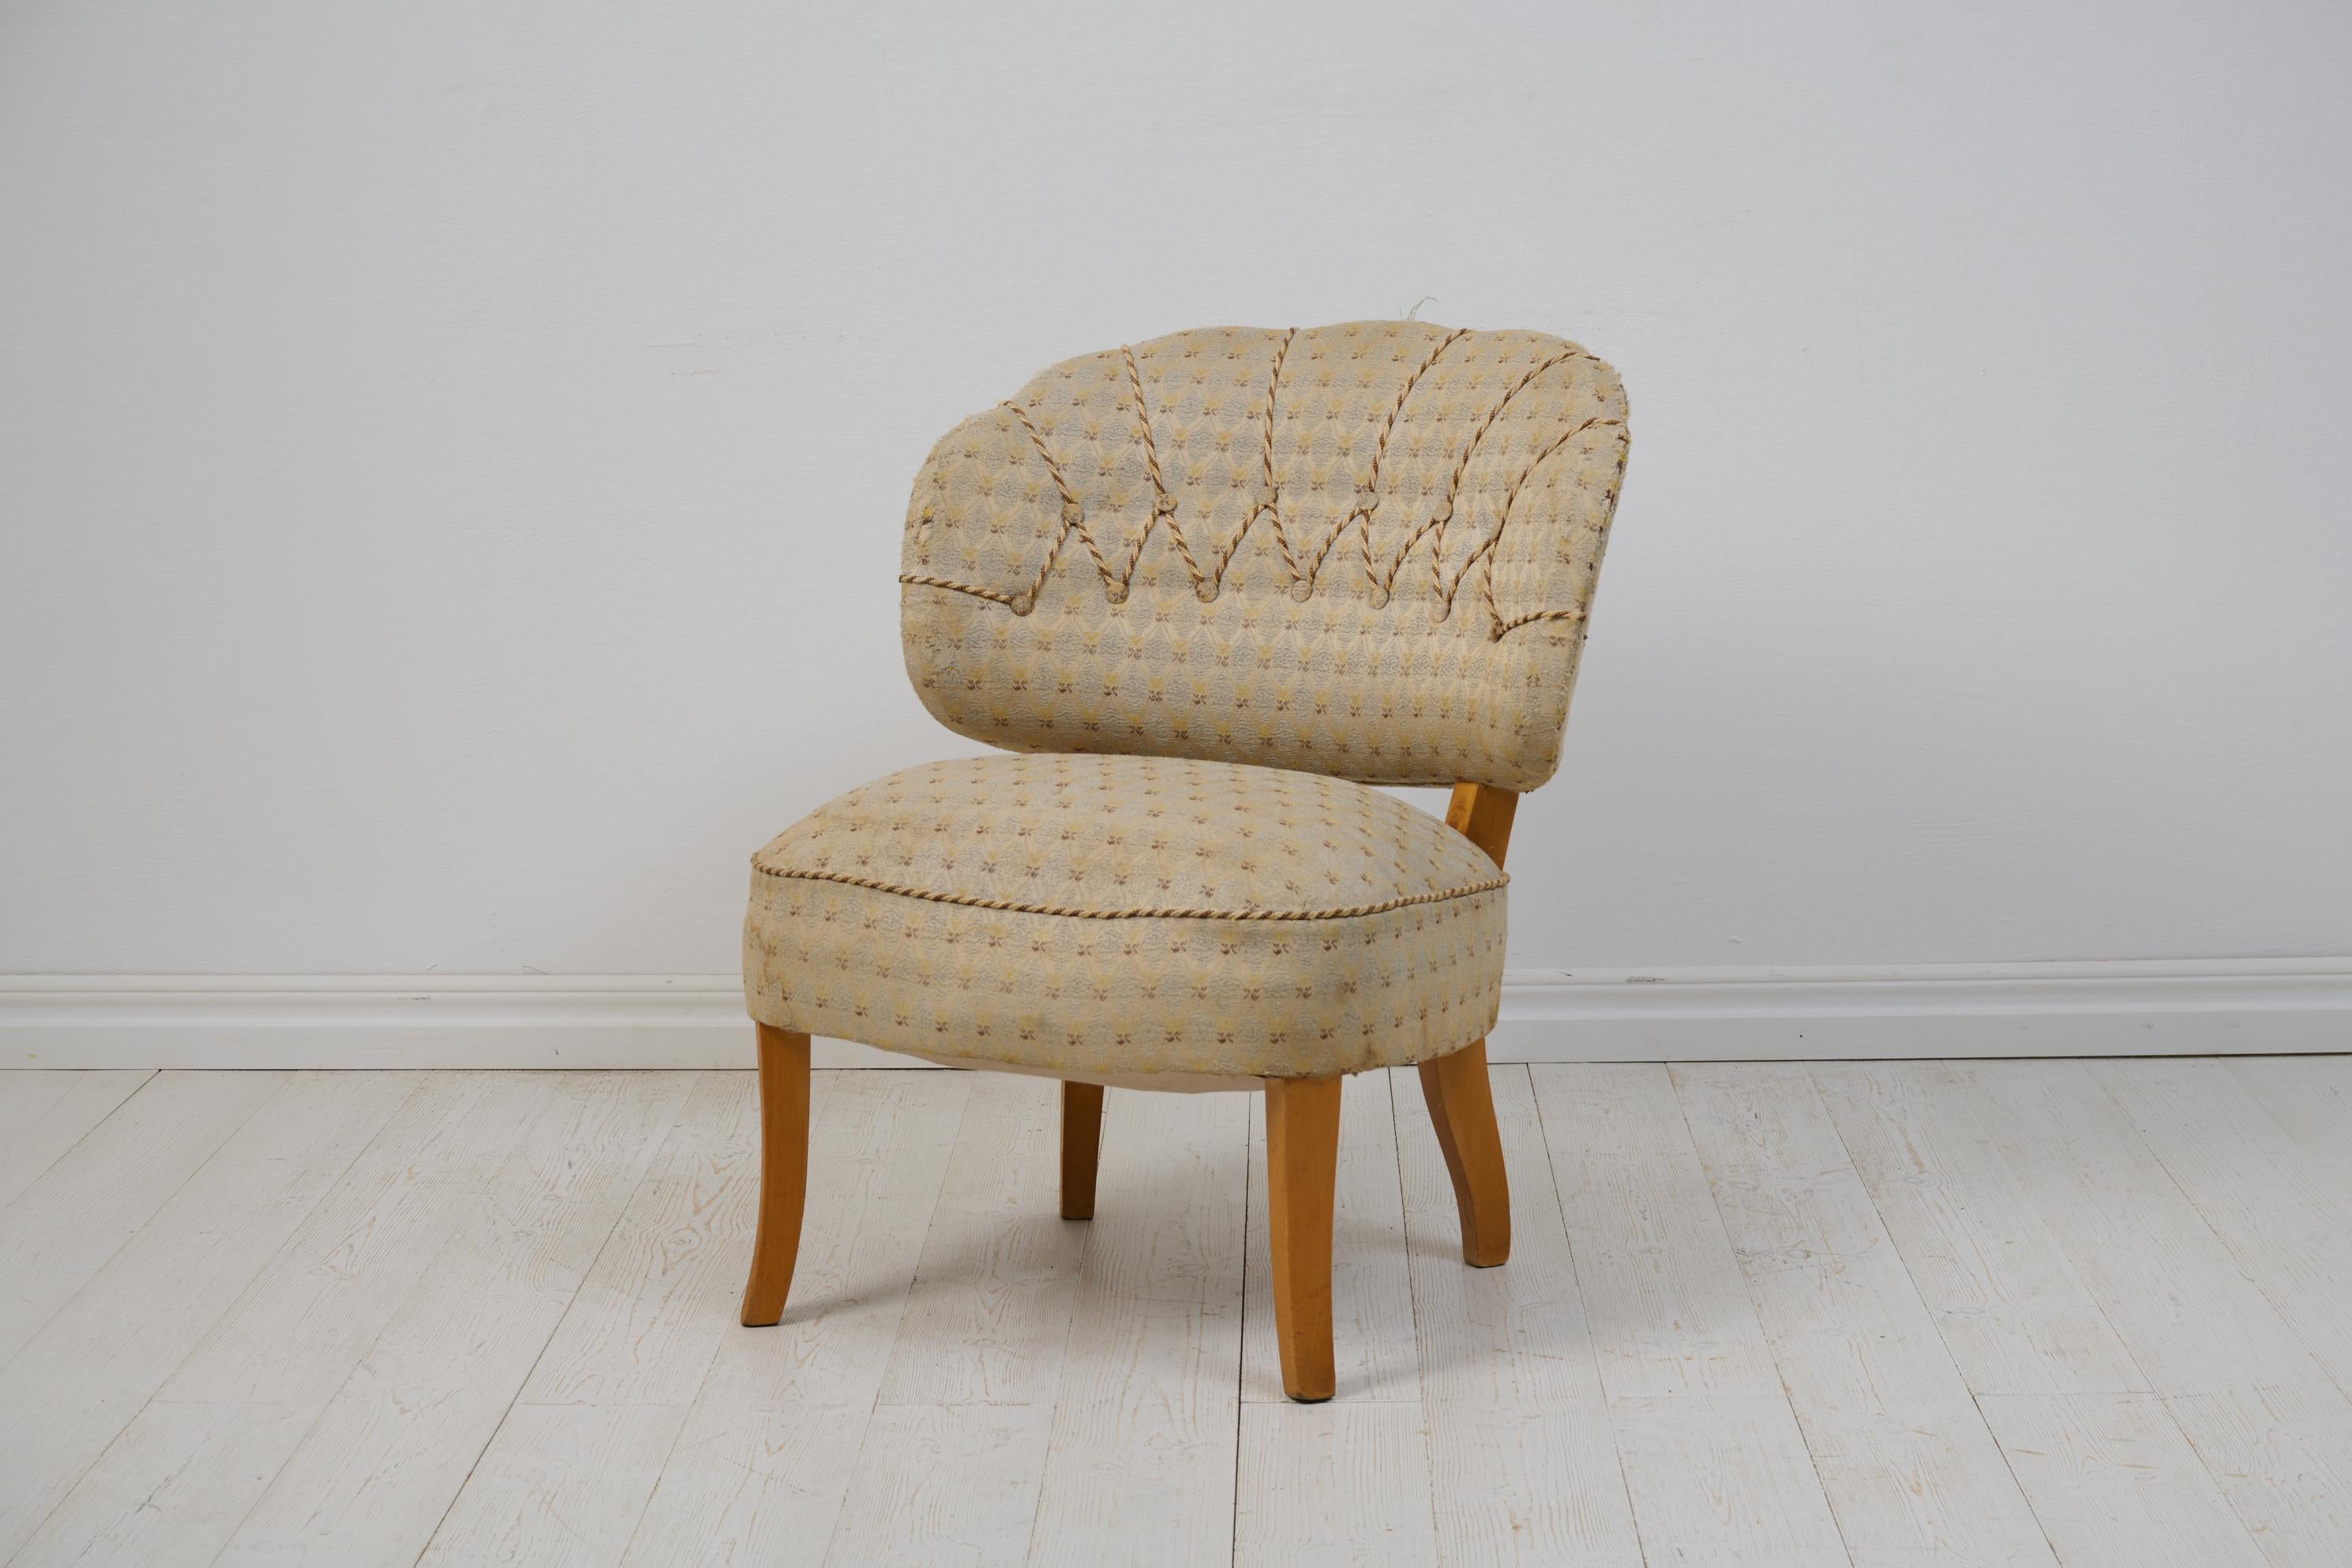 Swedish Carl Malmsten armchair 'Gamla Berlin' from the 1940s. The chair has a frame in birch with a curved and padded back featuring tufted buttons. Carl Malmsten is one of the biggest names in Swedish modern design, and his works are elegant